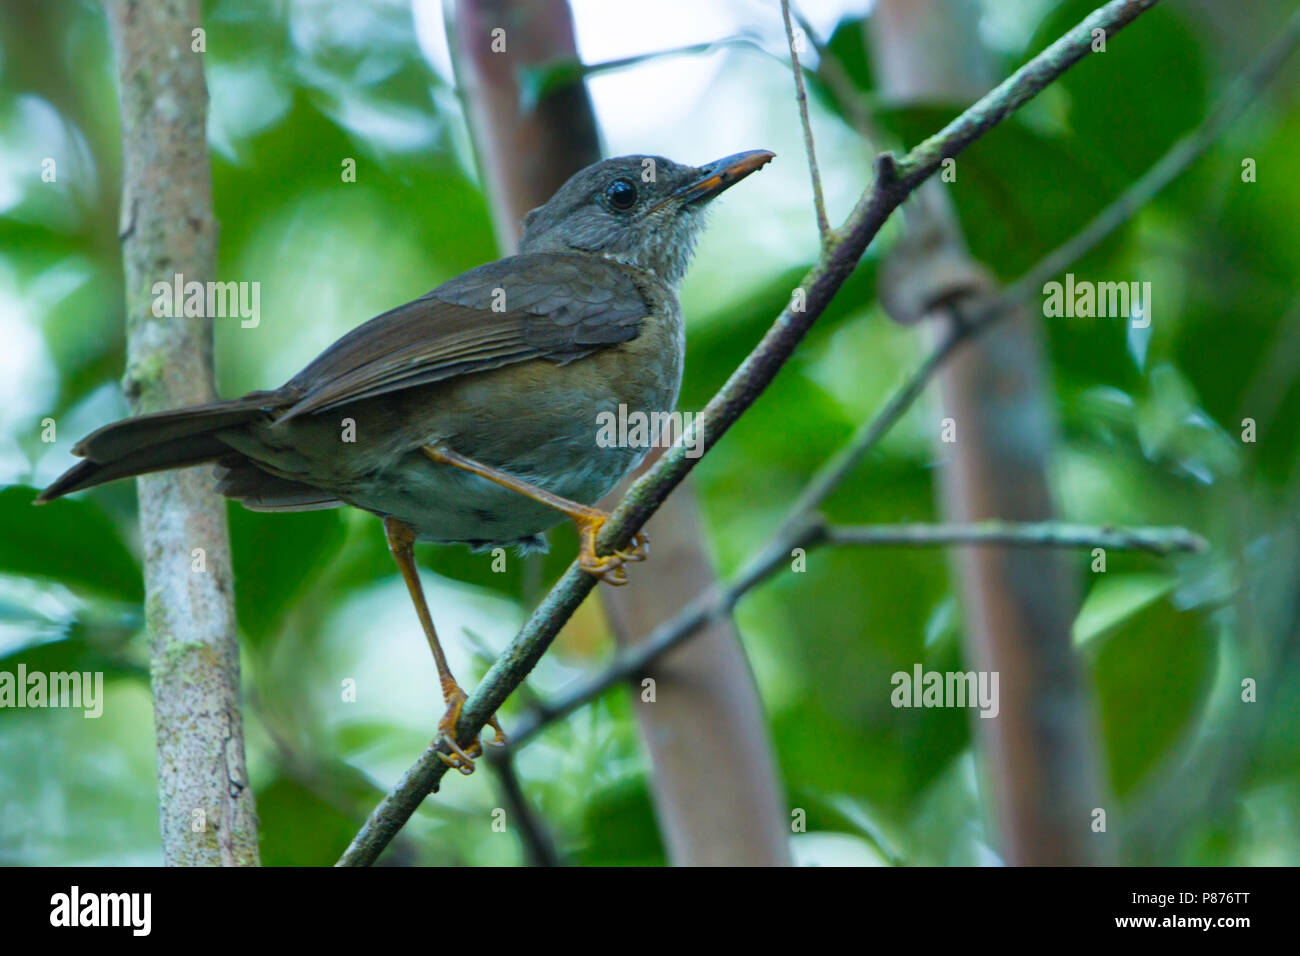 Comoro Thrush (Turdus bewsher) perched on a tree Stock Photo